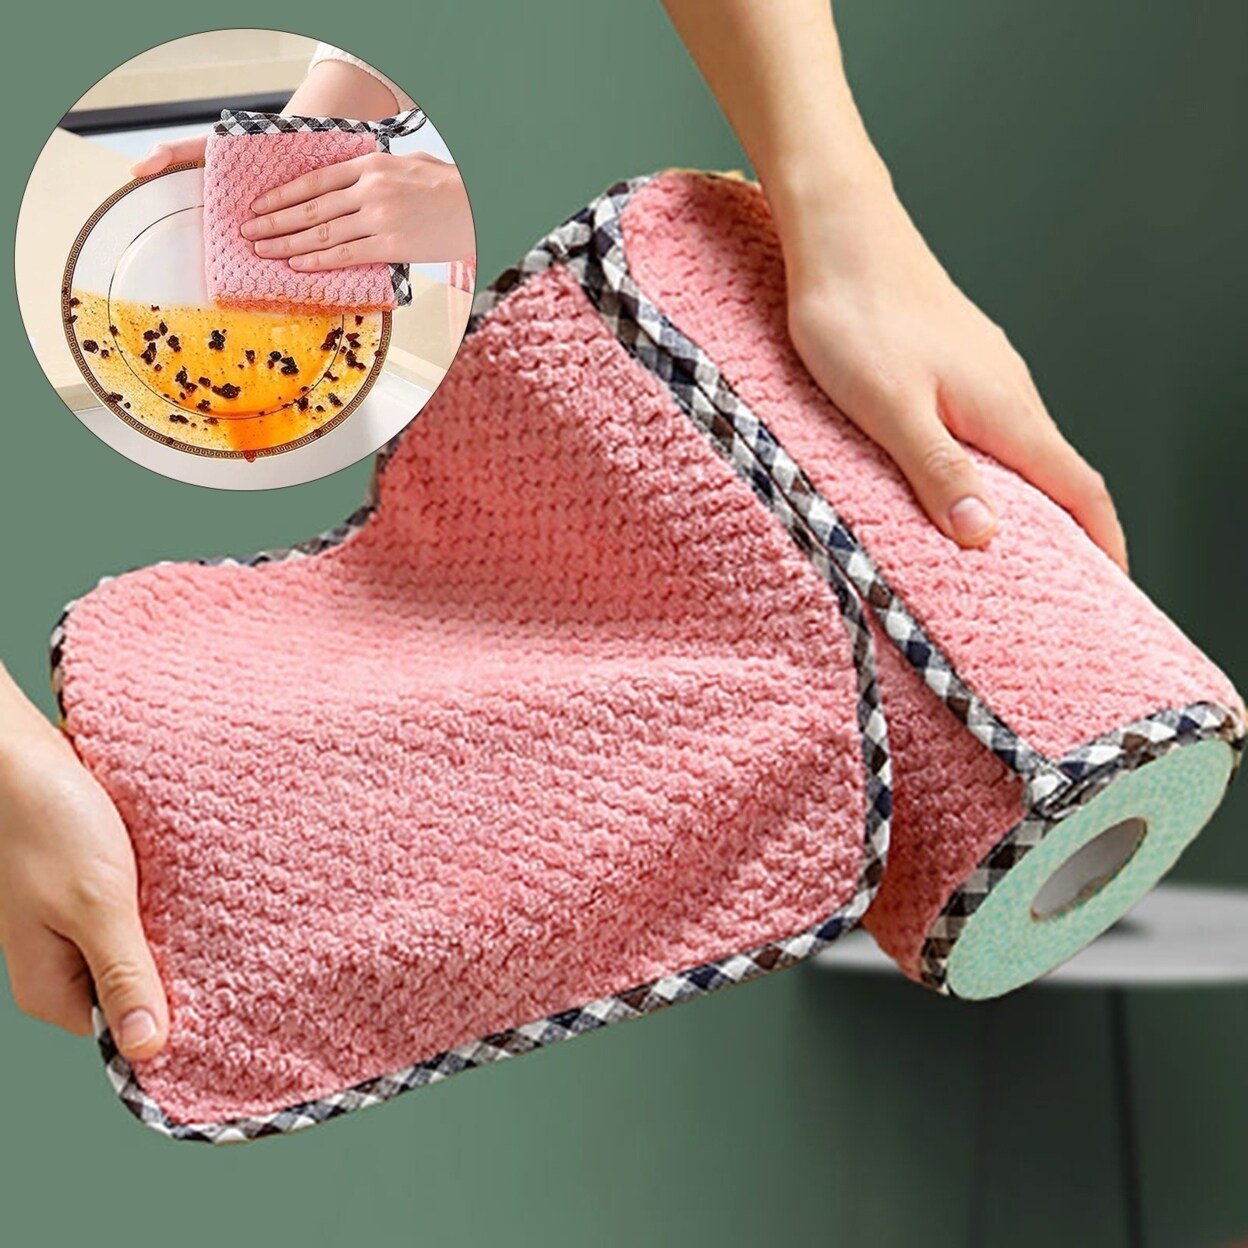 https://ak1.ostkcdn.com/images/products/is/images/direct/48395c291373f051bfe044e8111dc67731b1cf8f/10Pcs-Anti-Grease-Rag-Super-Absorbent-Cleaning-Cloth-Kitchen-Washing-Dish-Towel.jpg